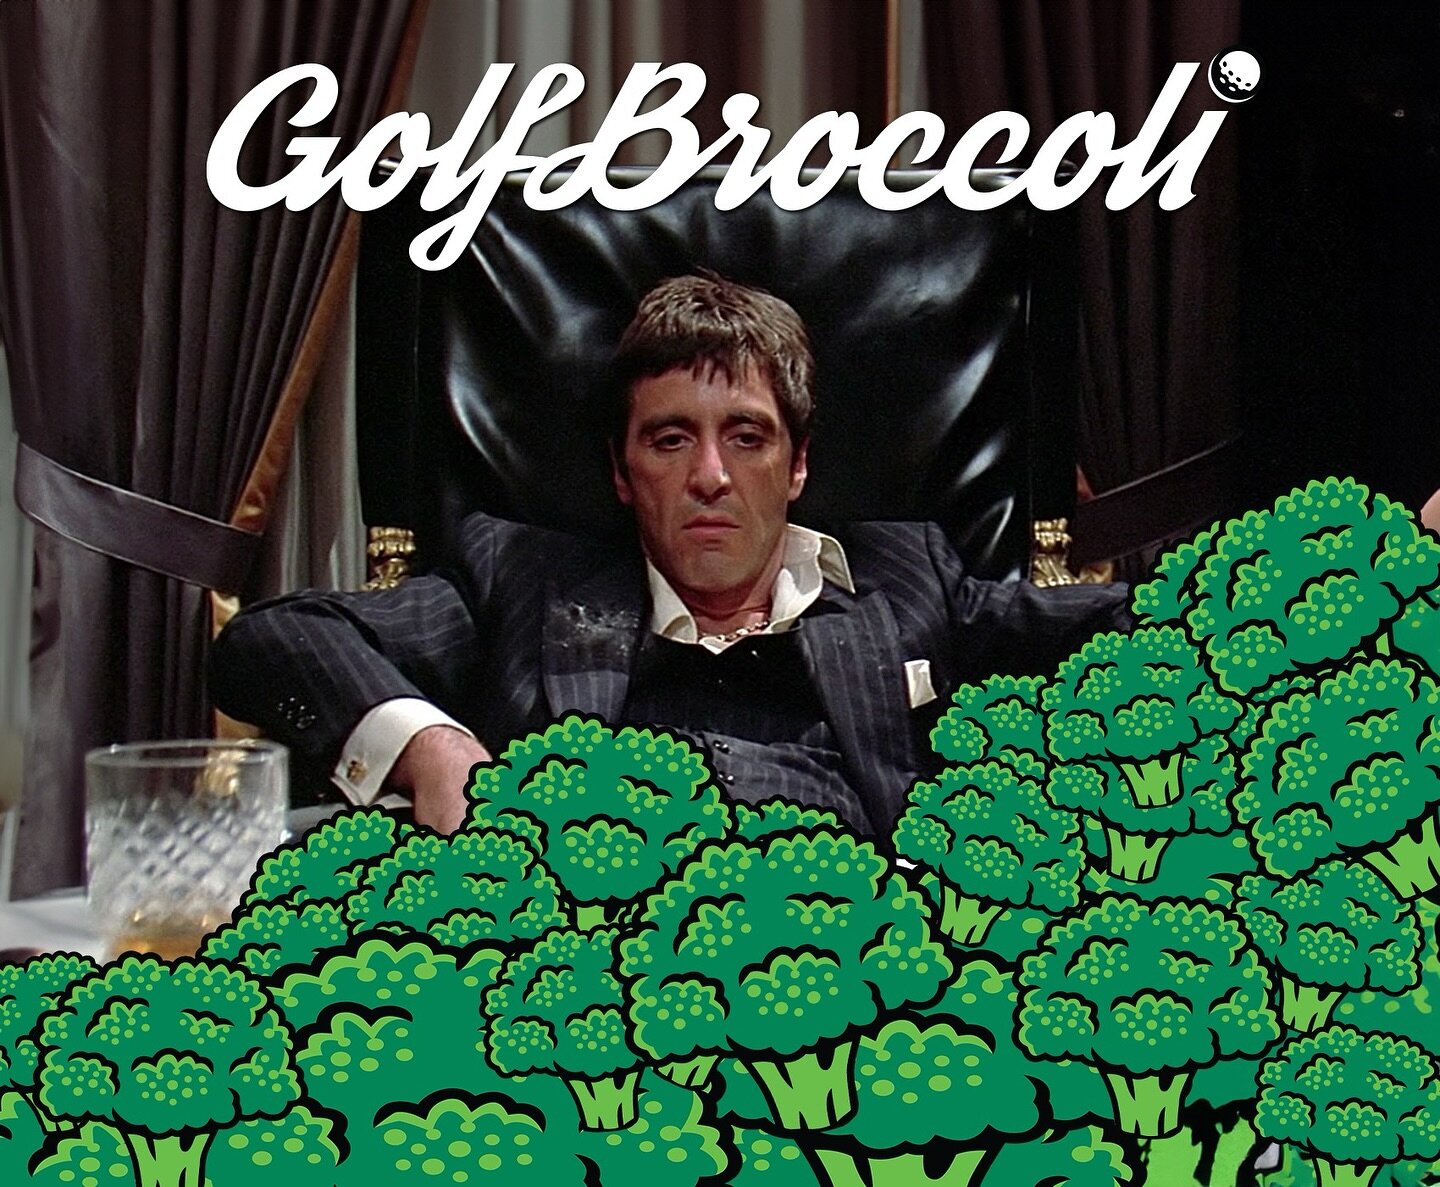 I only have 2 things in this world, Chico: my broccoli and my word.  #scarface #golfbroccoli #golfstuff #theworldisyours #staysmiling #broccoli #golf